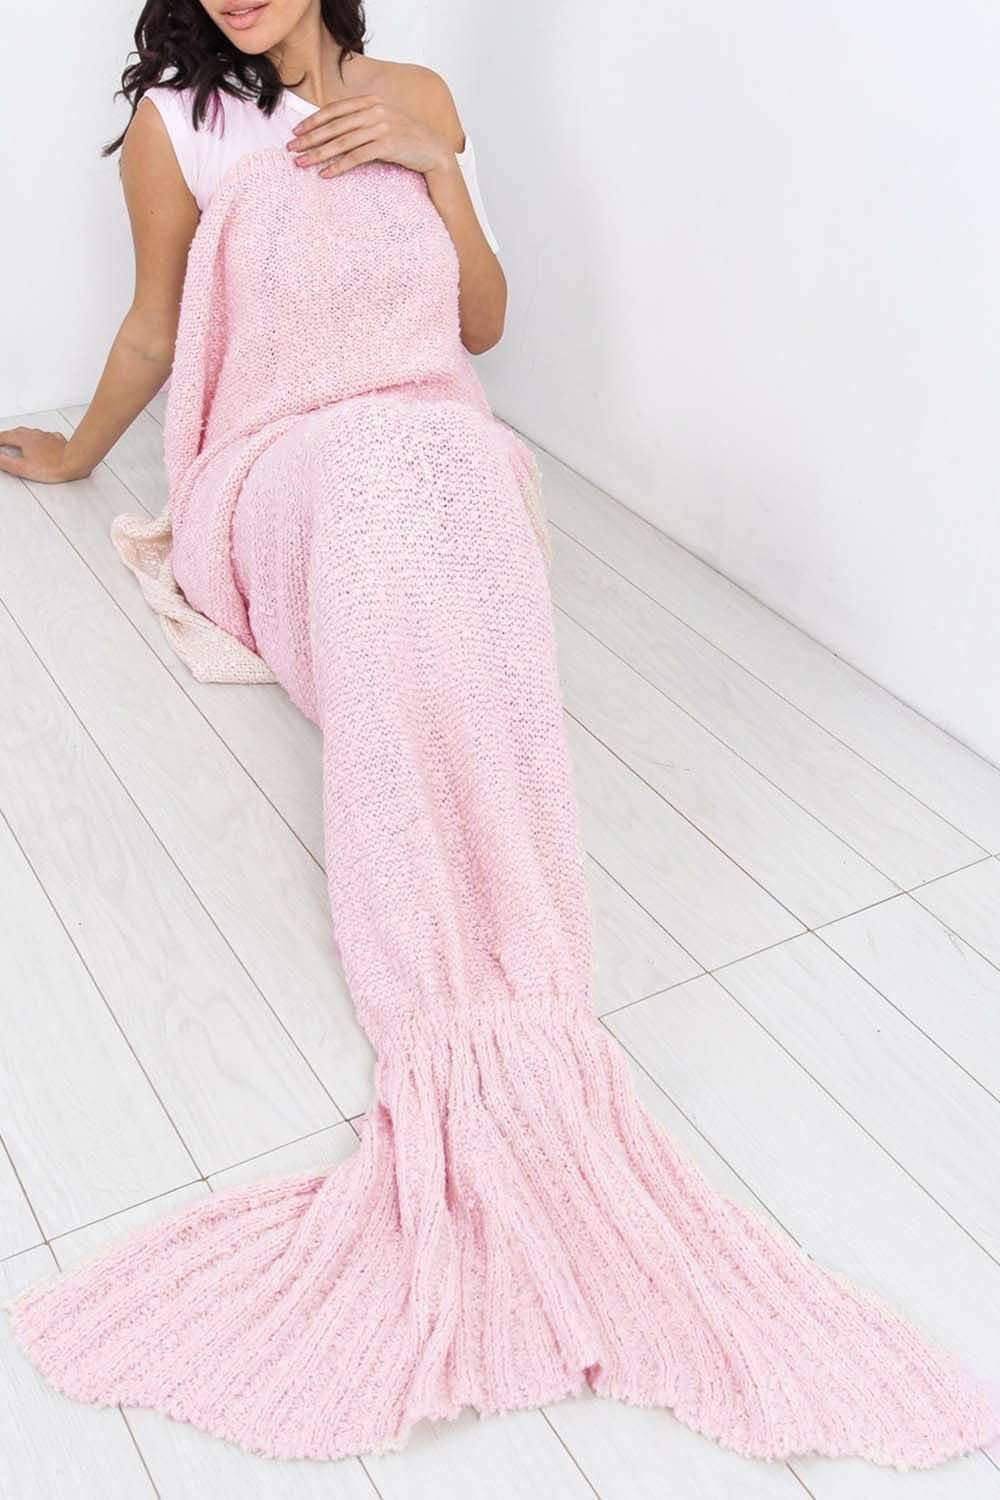 Super Soft Fish Tail Knitted Mermaid Blanket - bejealous-com